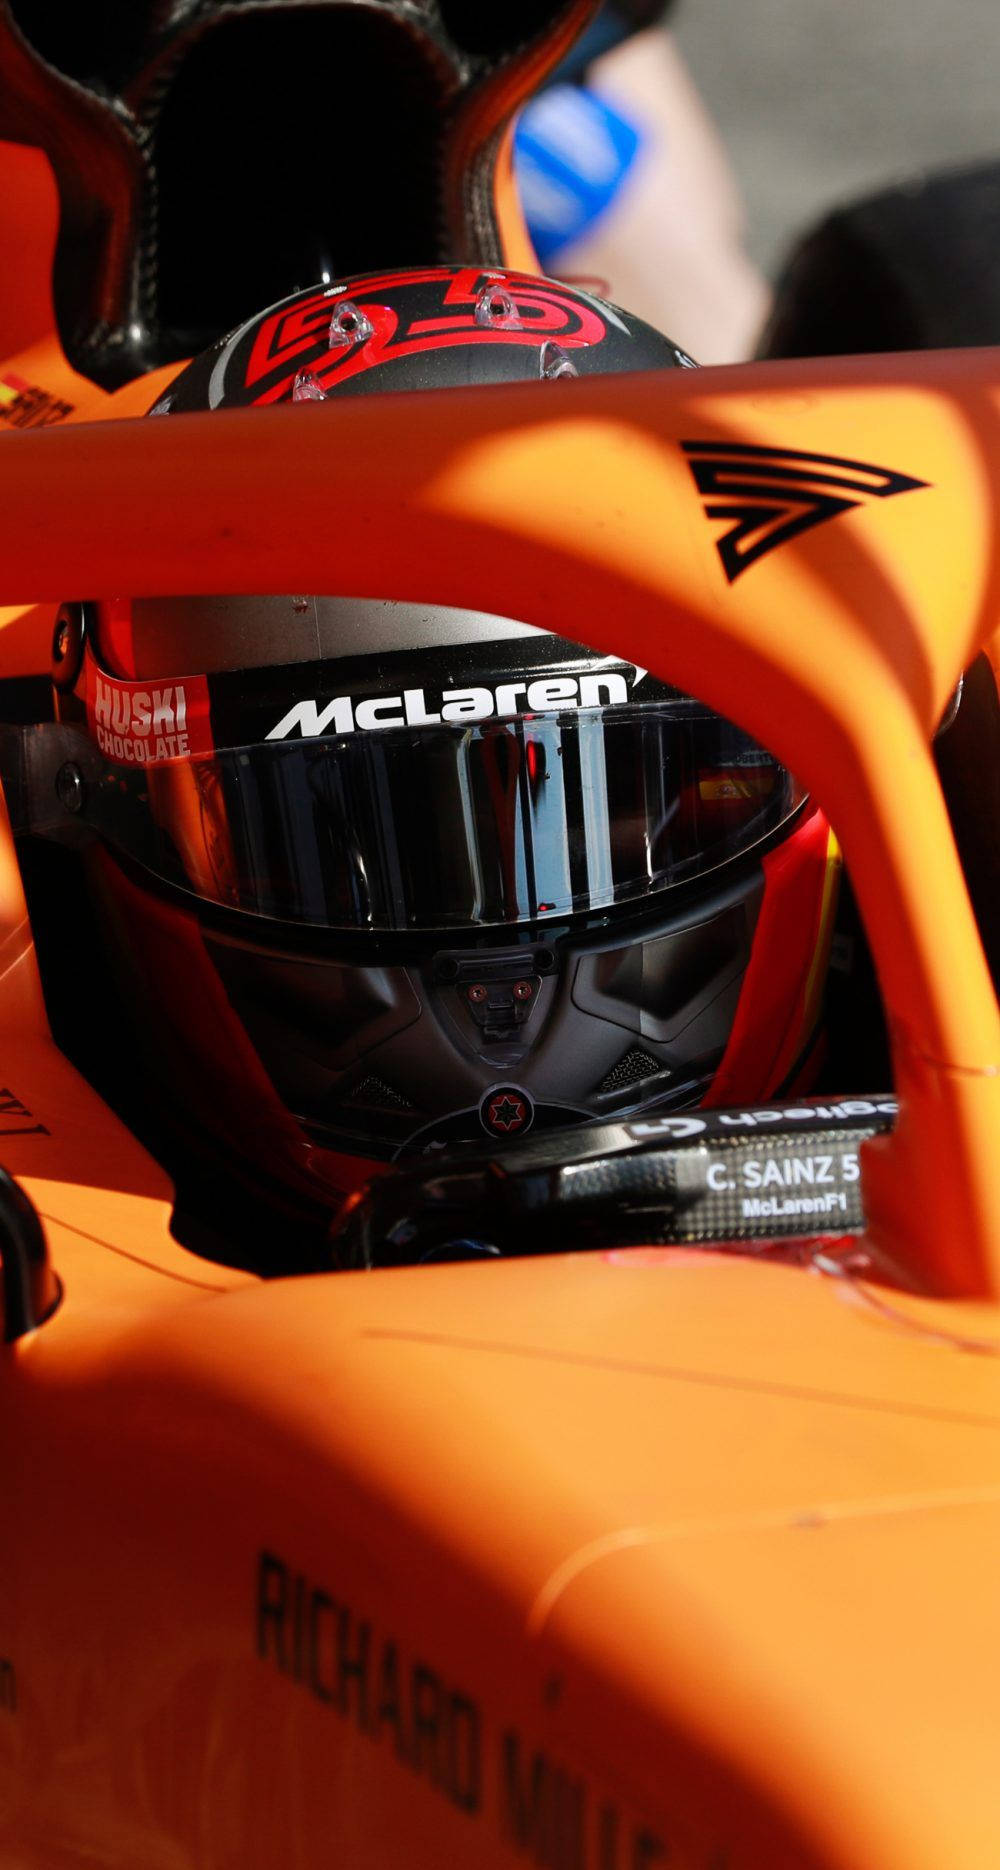 F1 Star Daniel Ricciardo Equipped With His Helmet In His Racing Vehicle